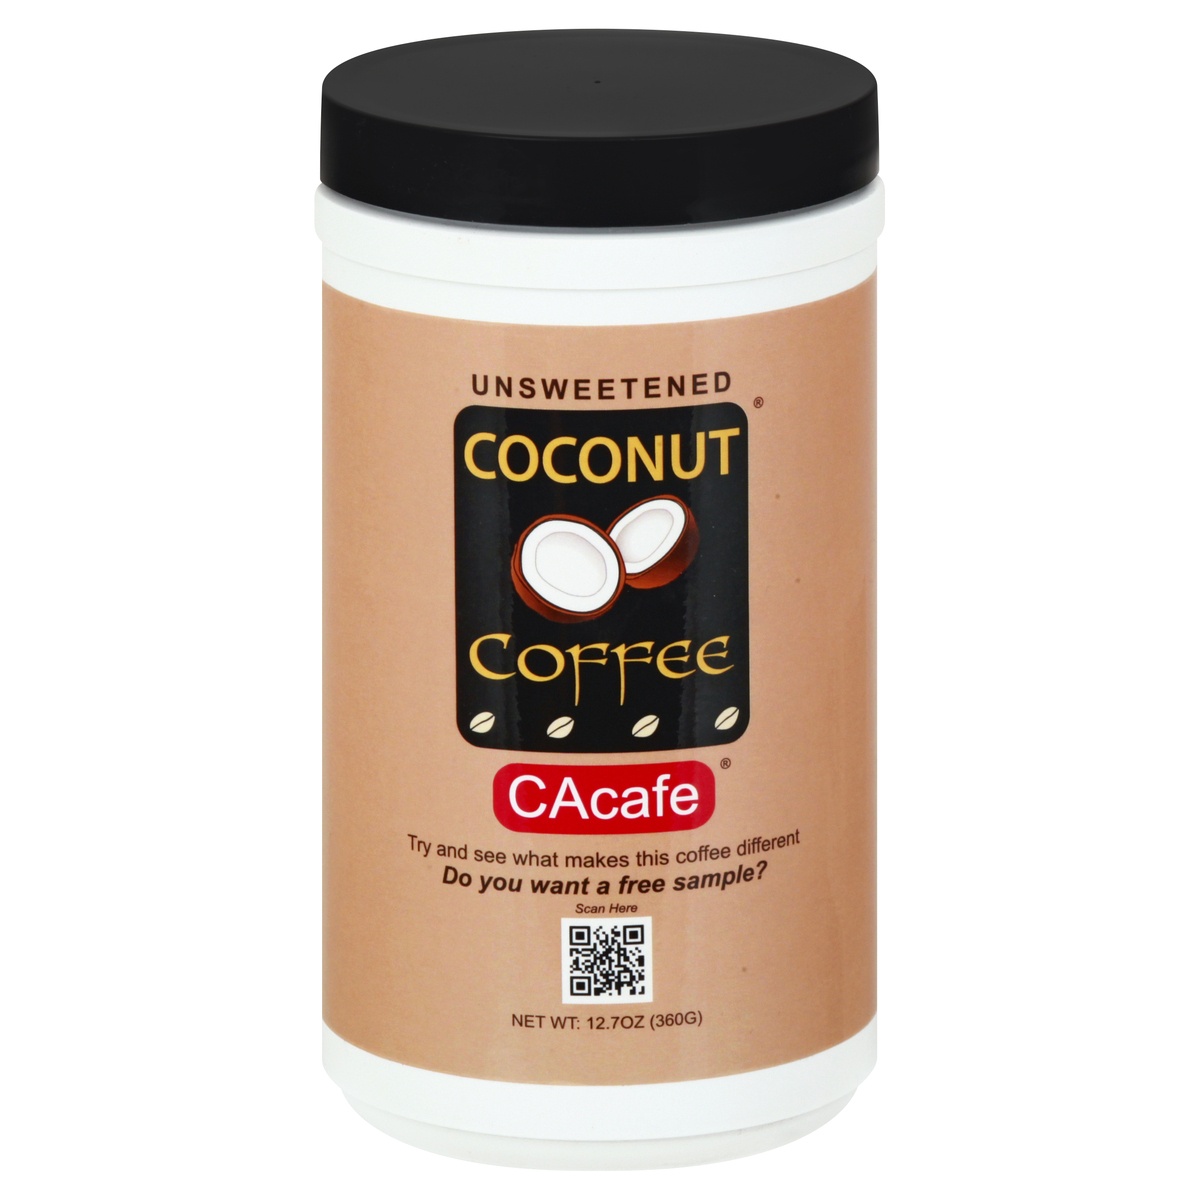 slide 1 of 1, CAcafe Coconut Unsweetened Coffee 12.7 oz, 12.7 oz